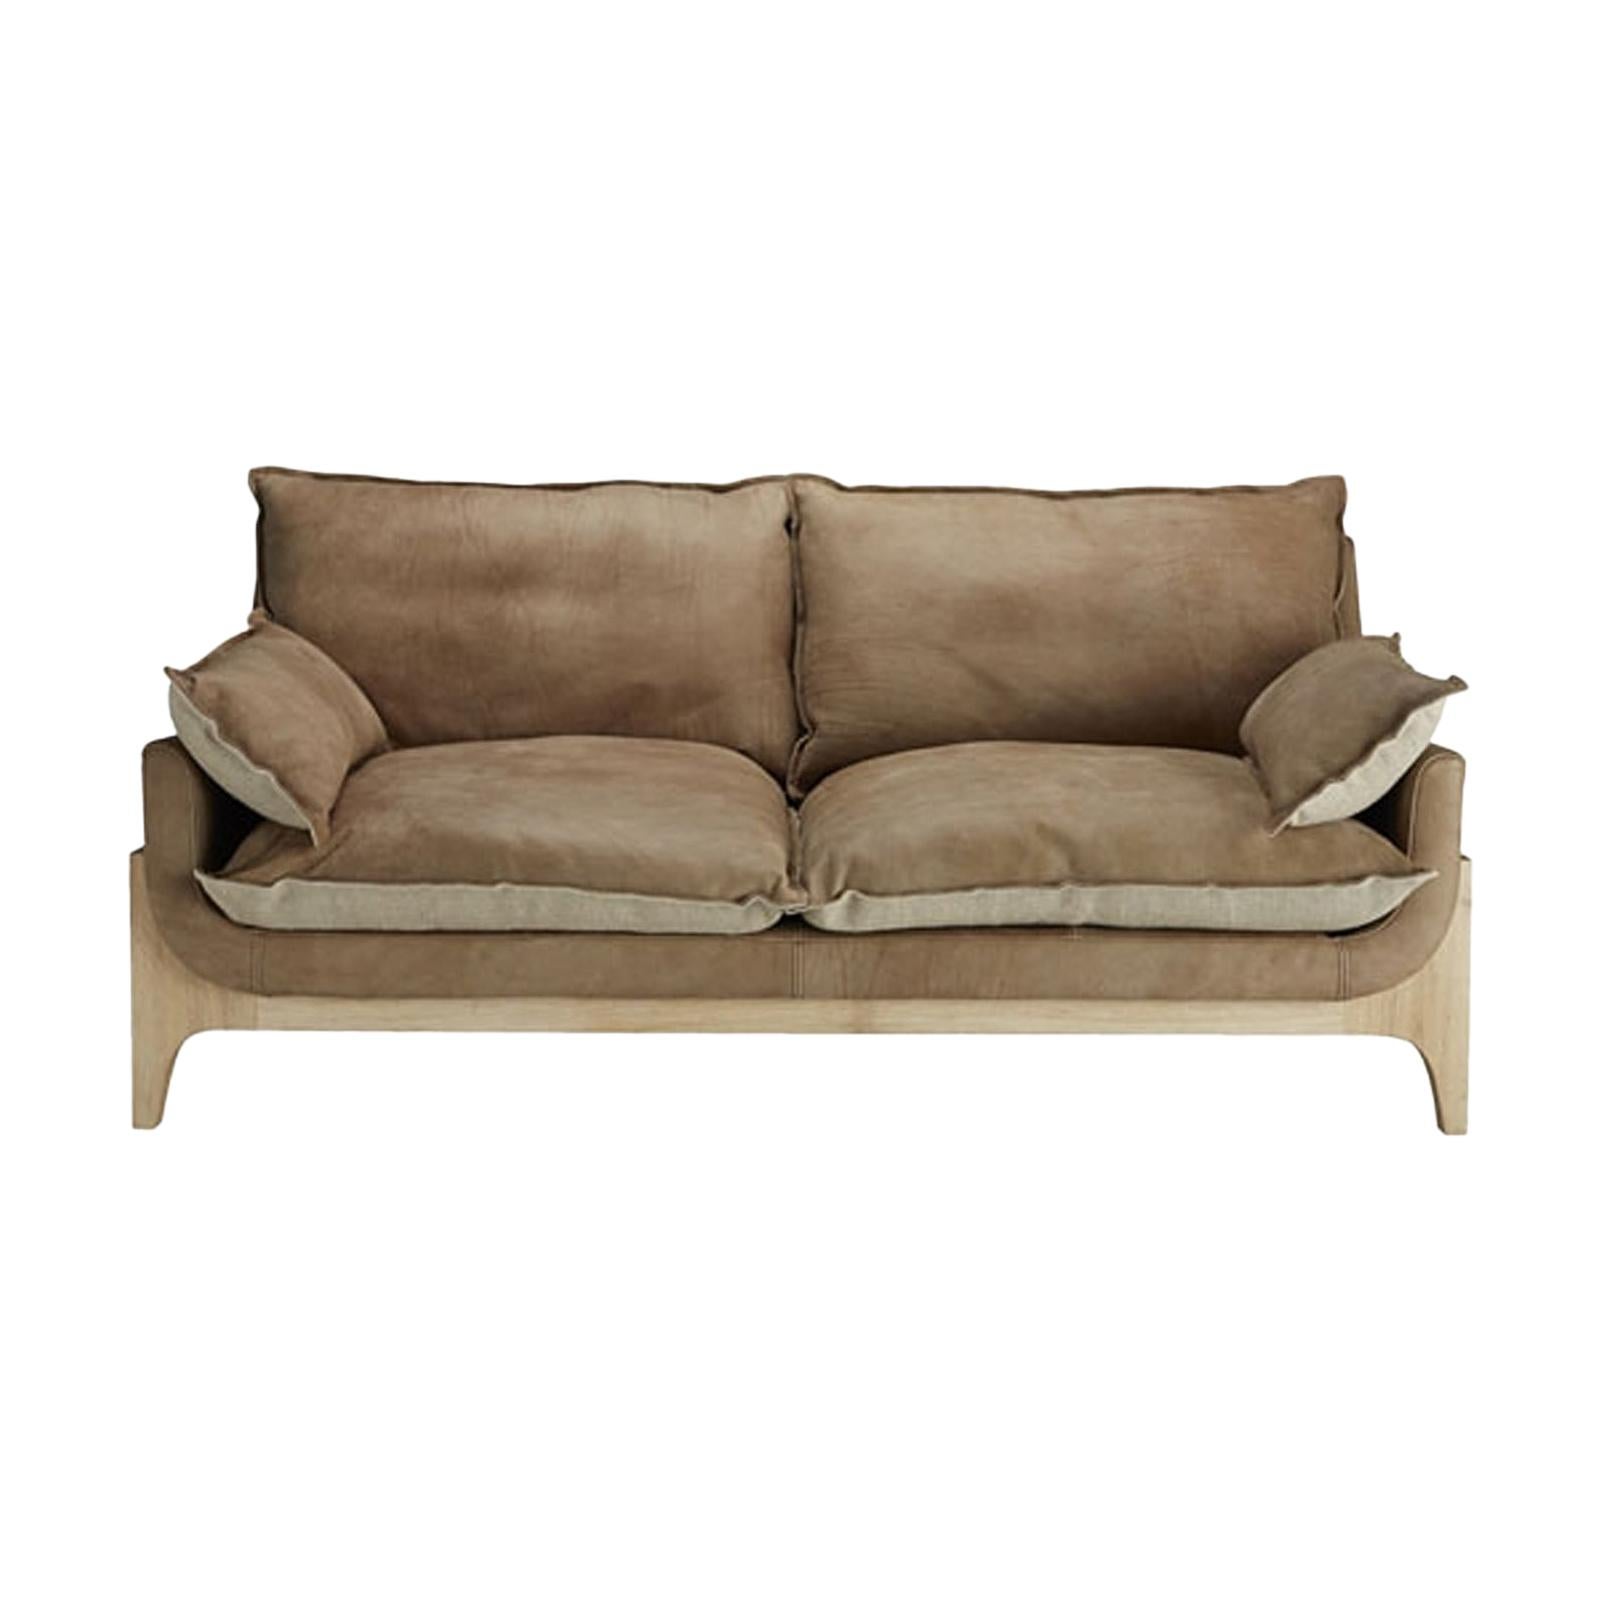 Indiana Sofa High Quality Genuine Leather and Linen